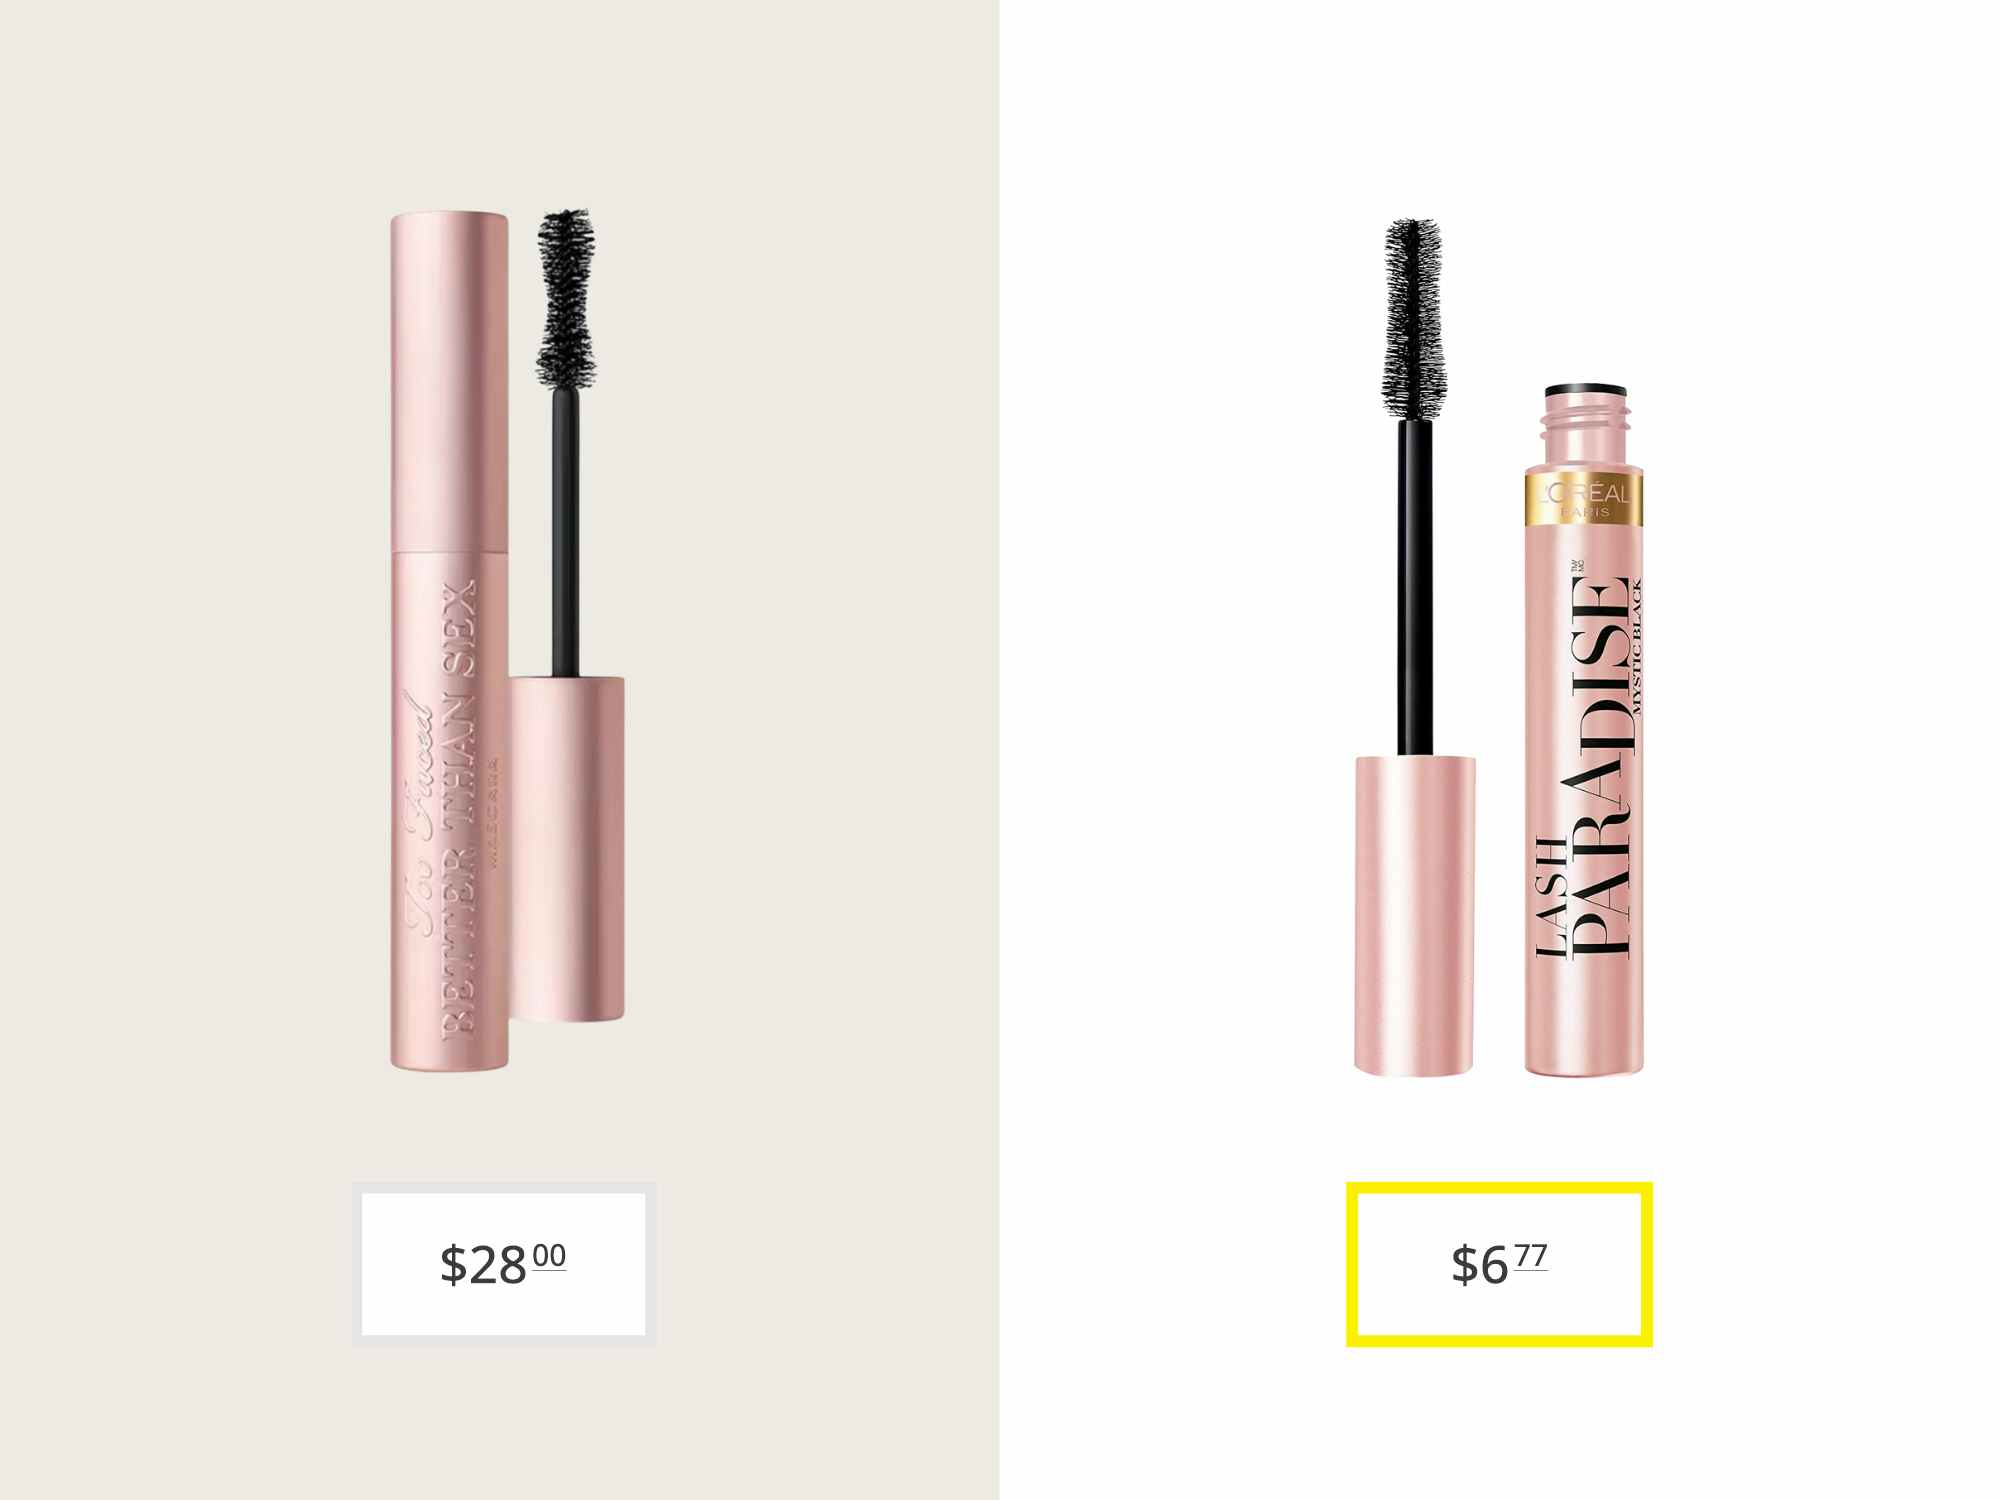 too faced better than sex mascara and loreal lash paradise mascara price comparison graphic